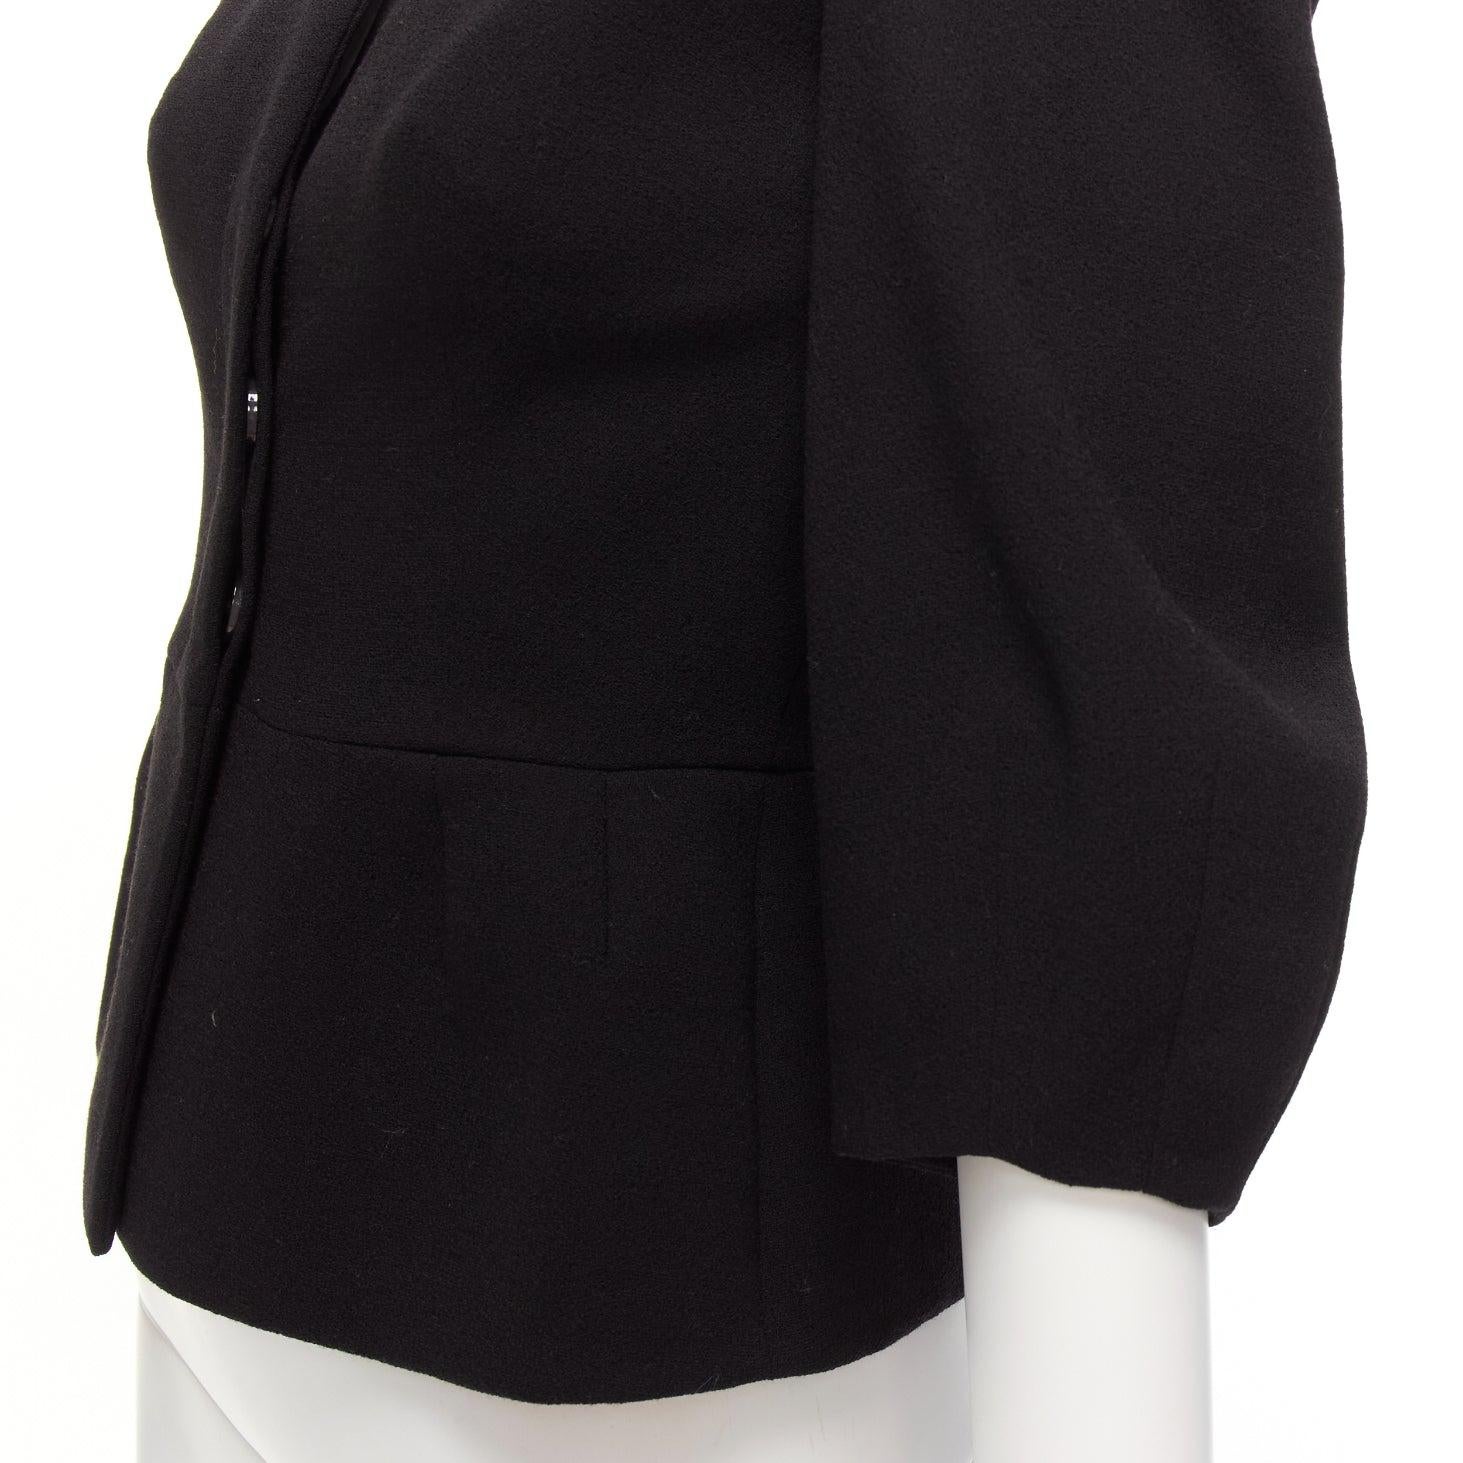 ALEXANDER MCQUEEN black 100% wool cropped sleeve peplum jacket IT38 XS
Reference: EALU/A00015
Brand: Alexander McQueen
Material: Wool
Color: Black
Pattern: Solid
Closure: Button
Lining: Black Fabric
Extra Details: Peplum back.
Made in: